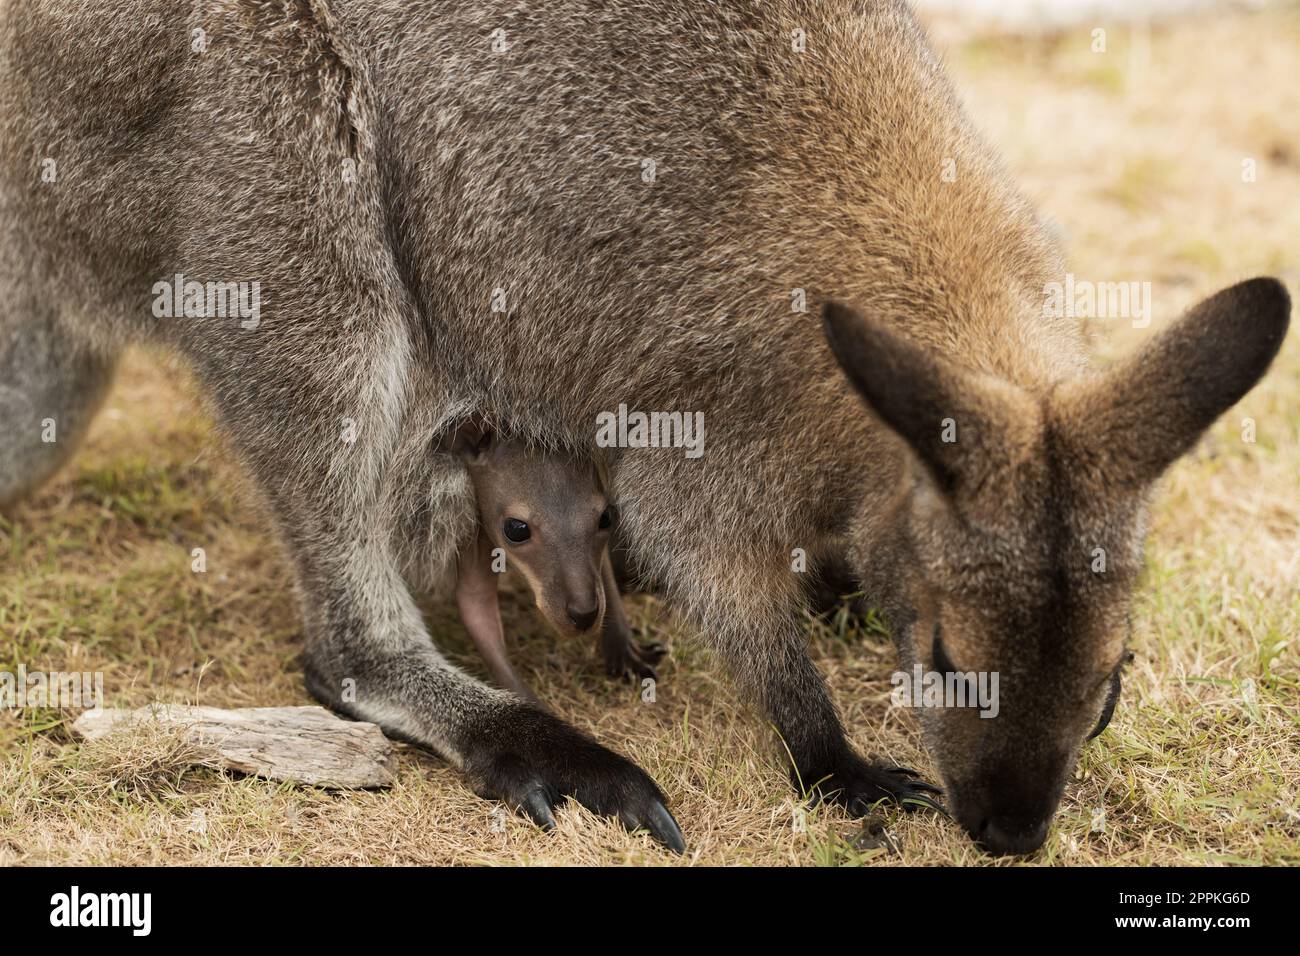 An Australian marsupial baby red necked wallaby joey (Macropus rufogriseus) sticking it's head out of it's mother's pouch. selective focus falling on Stock Photo